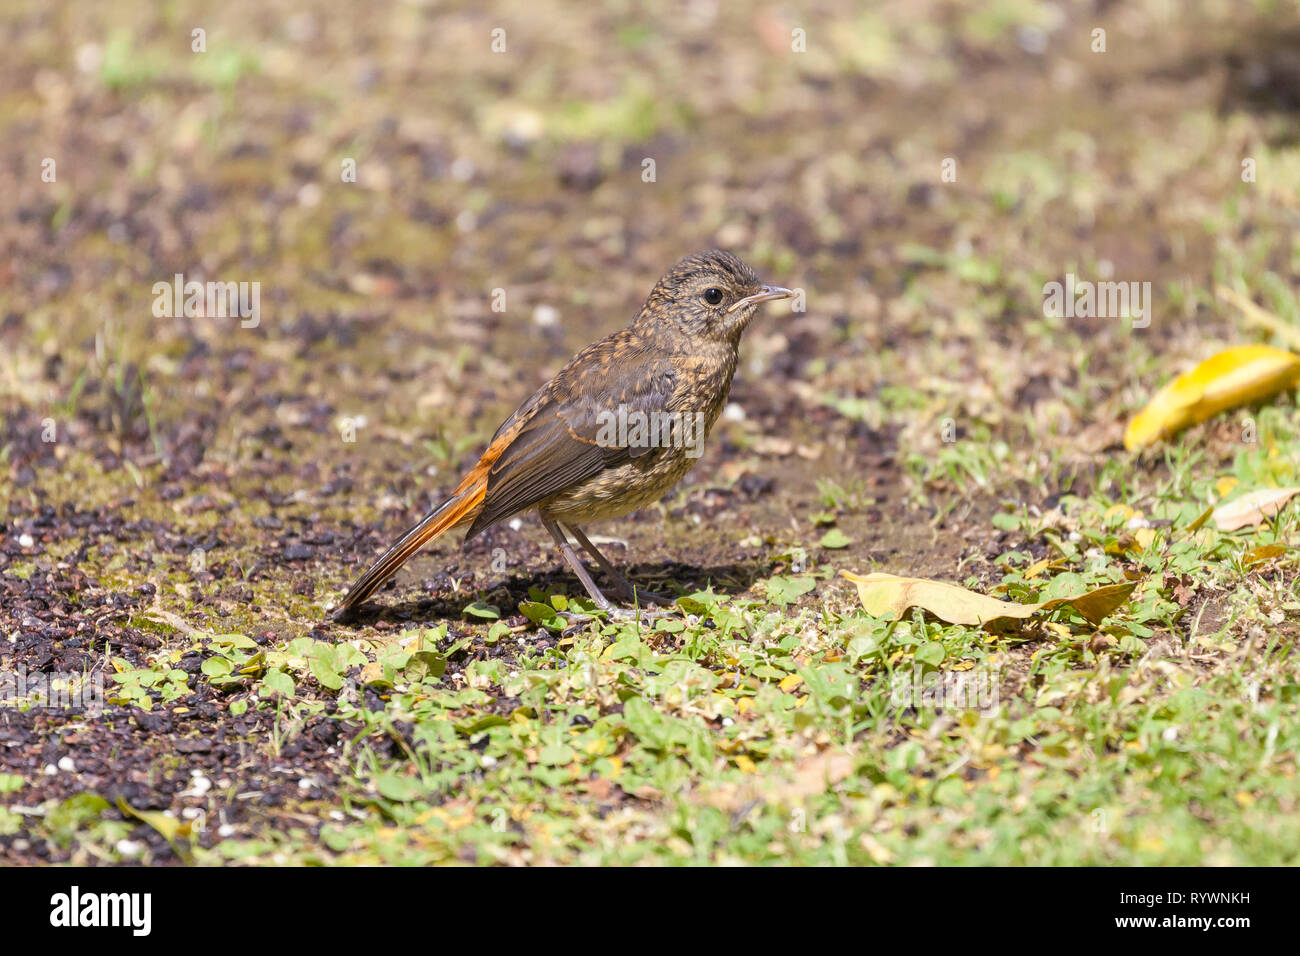 Juvenile Cape Robin-chat (Cossypha caffra) on ground in rural garden, Western Cape, South Africa in spring. Speckled feathers camouflage colouring Stock Photo